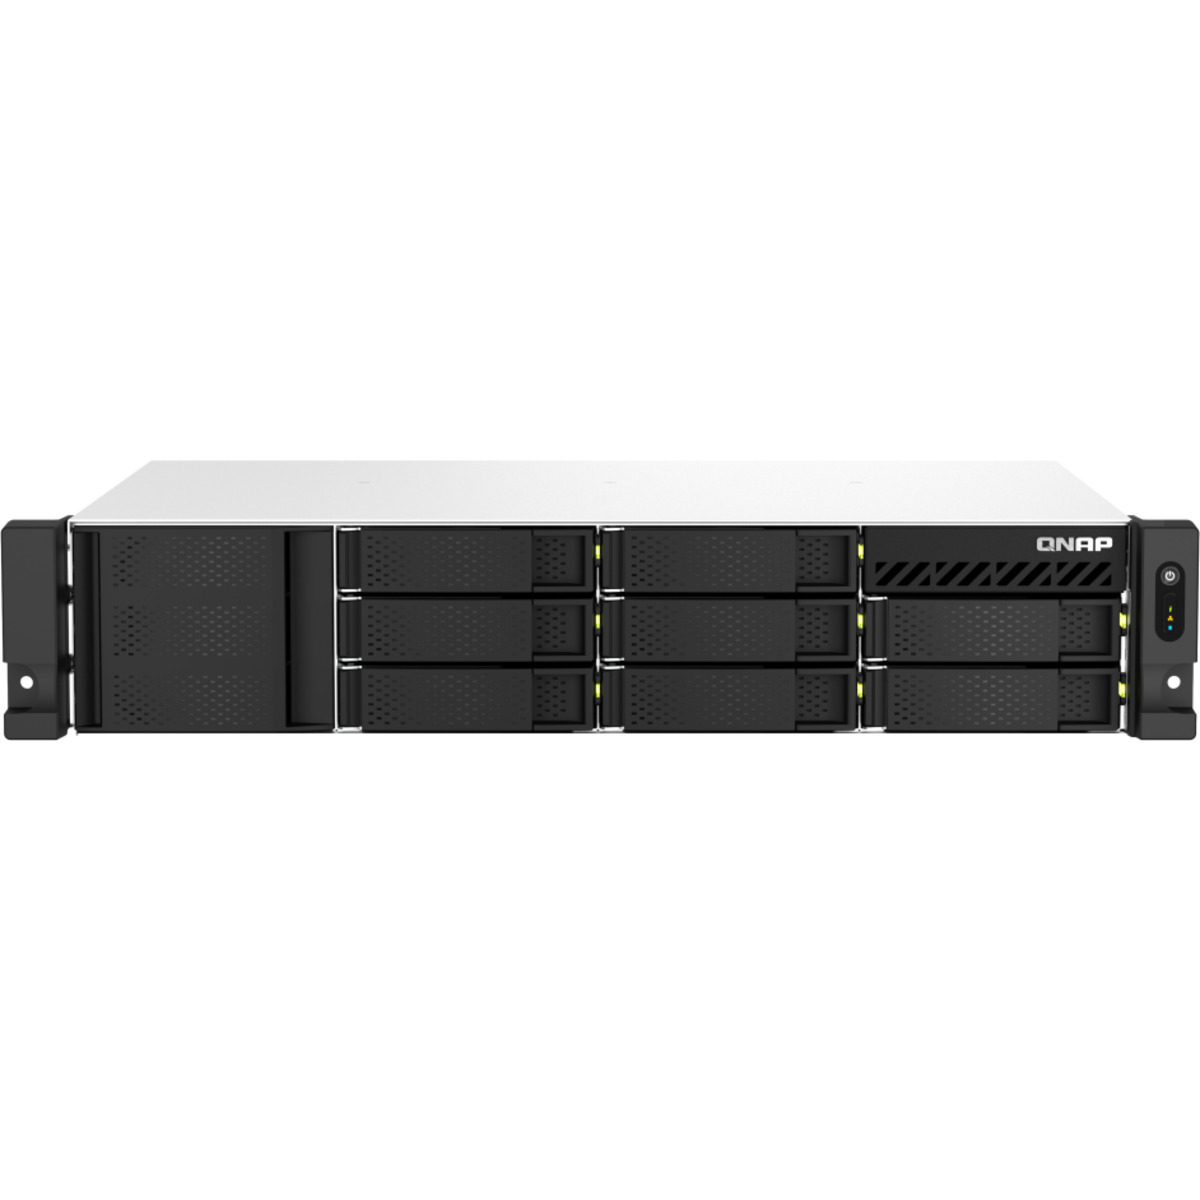 QNAP TS-873AeU-RP 48tb 8-Bay RackMount Multimedia / Power User / Business NAS - Network Attached Storage Device 4x12tb Western Digital Red Pro WD121KFBX 3.5 7200rpm SATA 6Gb/s HDD NAS Class Drives Installed - Burn-In Tested - FREE RAM UPGRADE TS-873AeU-RP